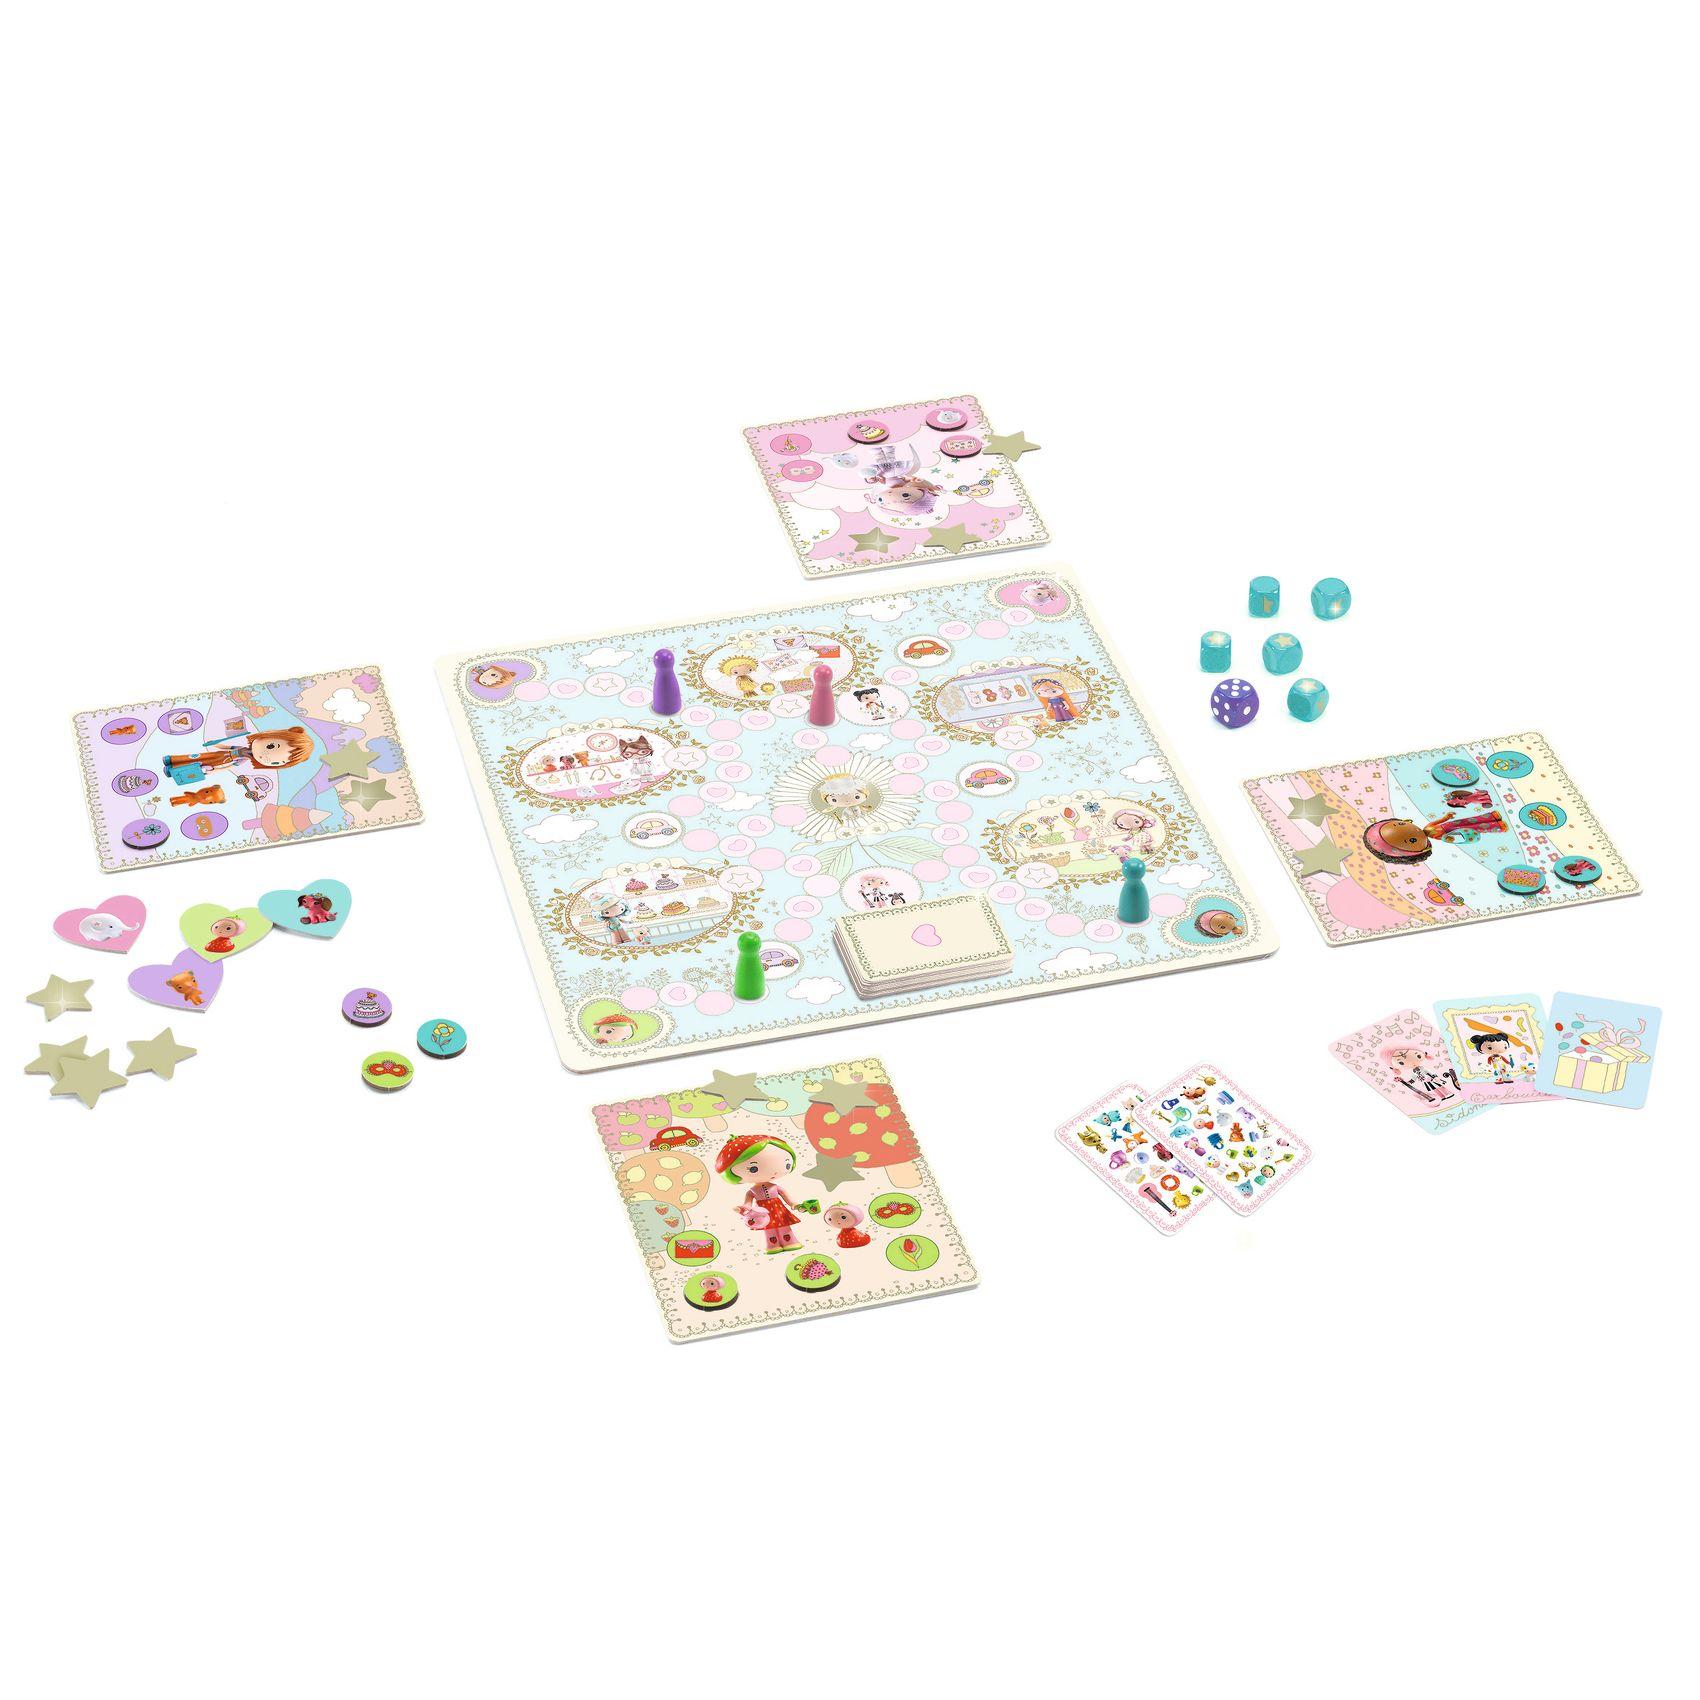 Tinyly Party Board Game by Djeco